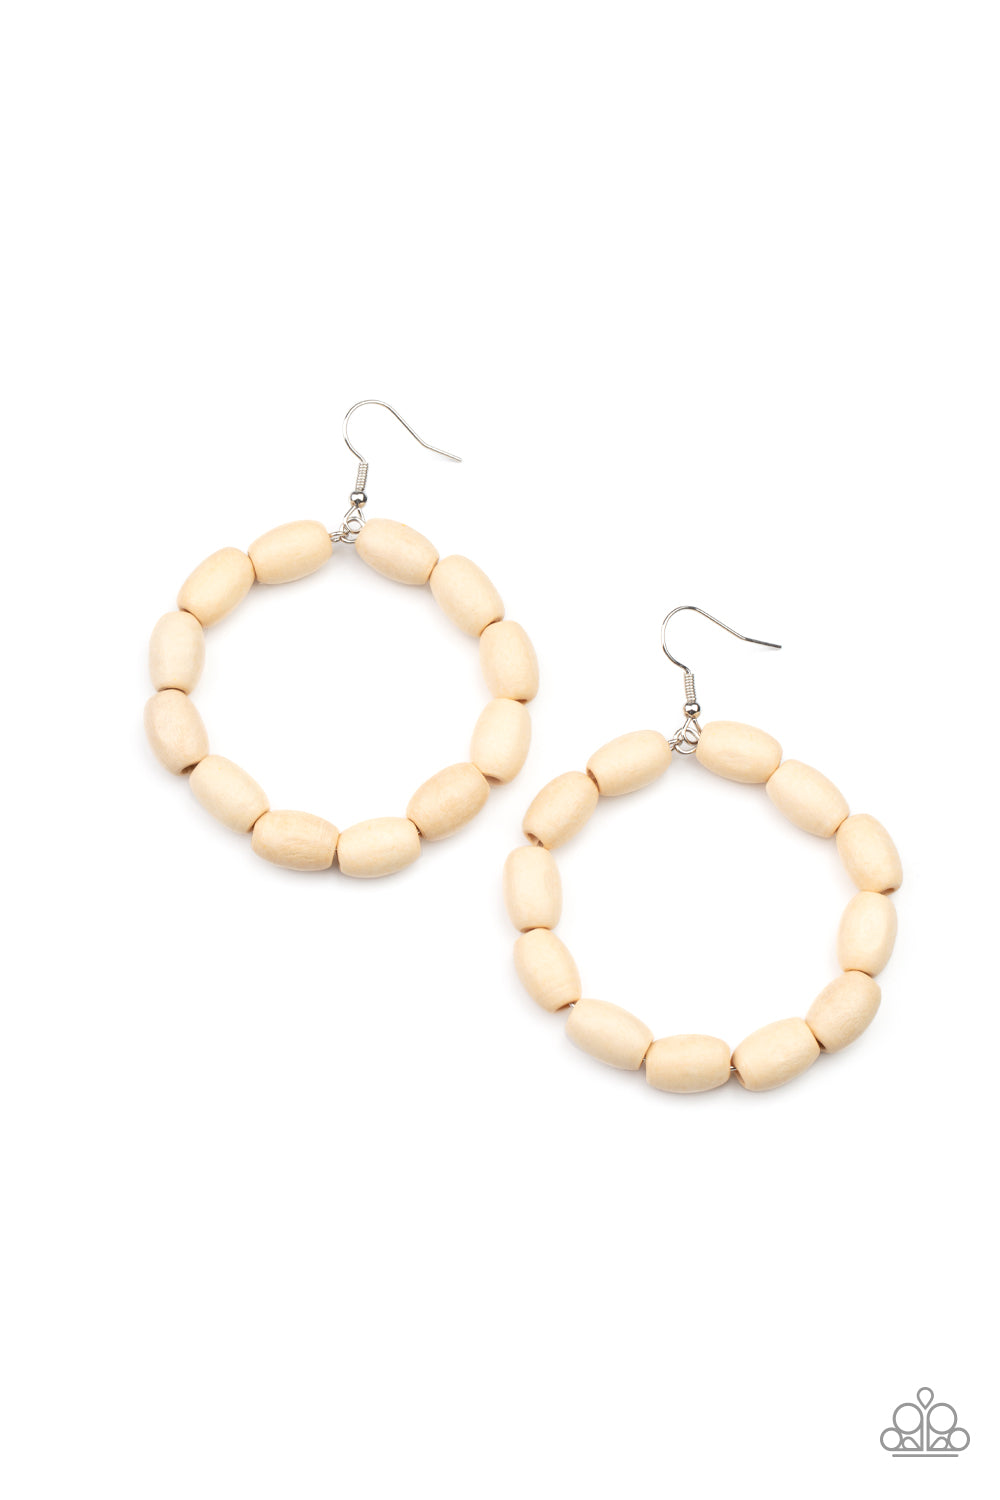 Paparazzi Living The WOOD Life - White Earrings - A Finishing Touch Jewelry